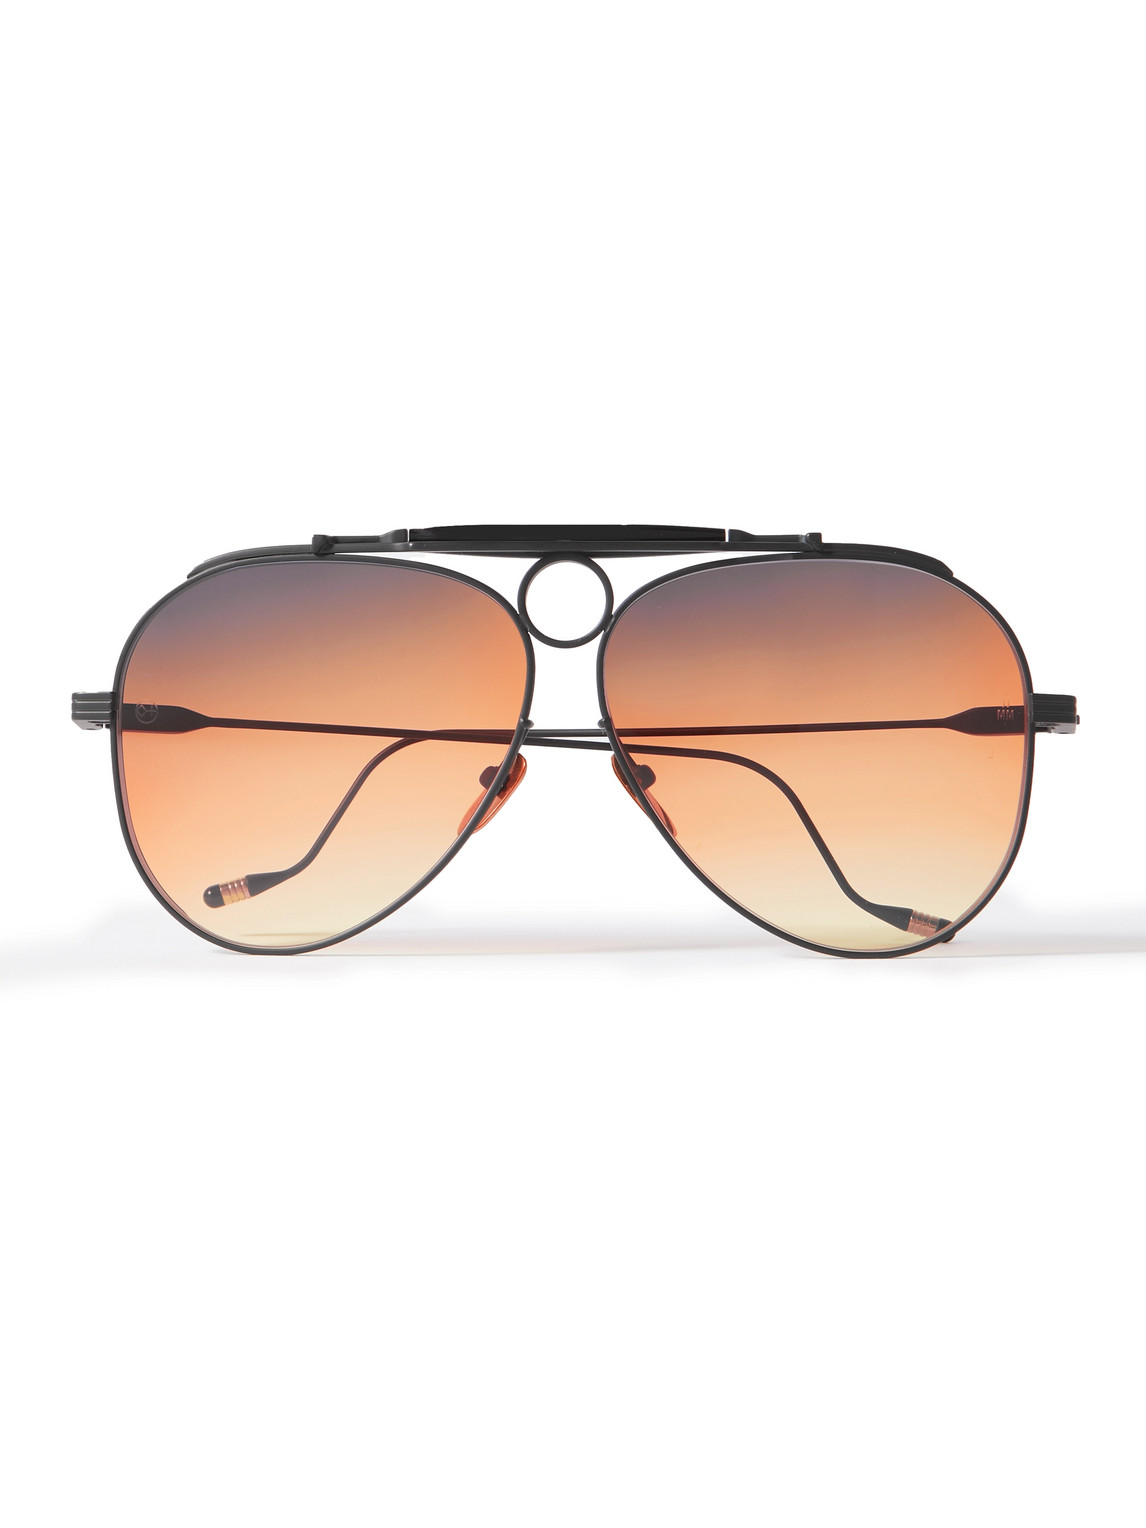 Jacques Marie Mage Diamond Cross Ranch Aviator-style Black-tone Sunglasses In Brown